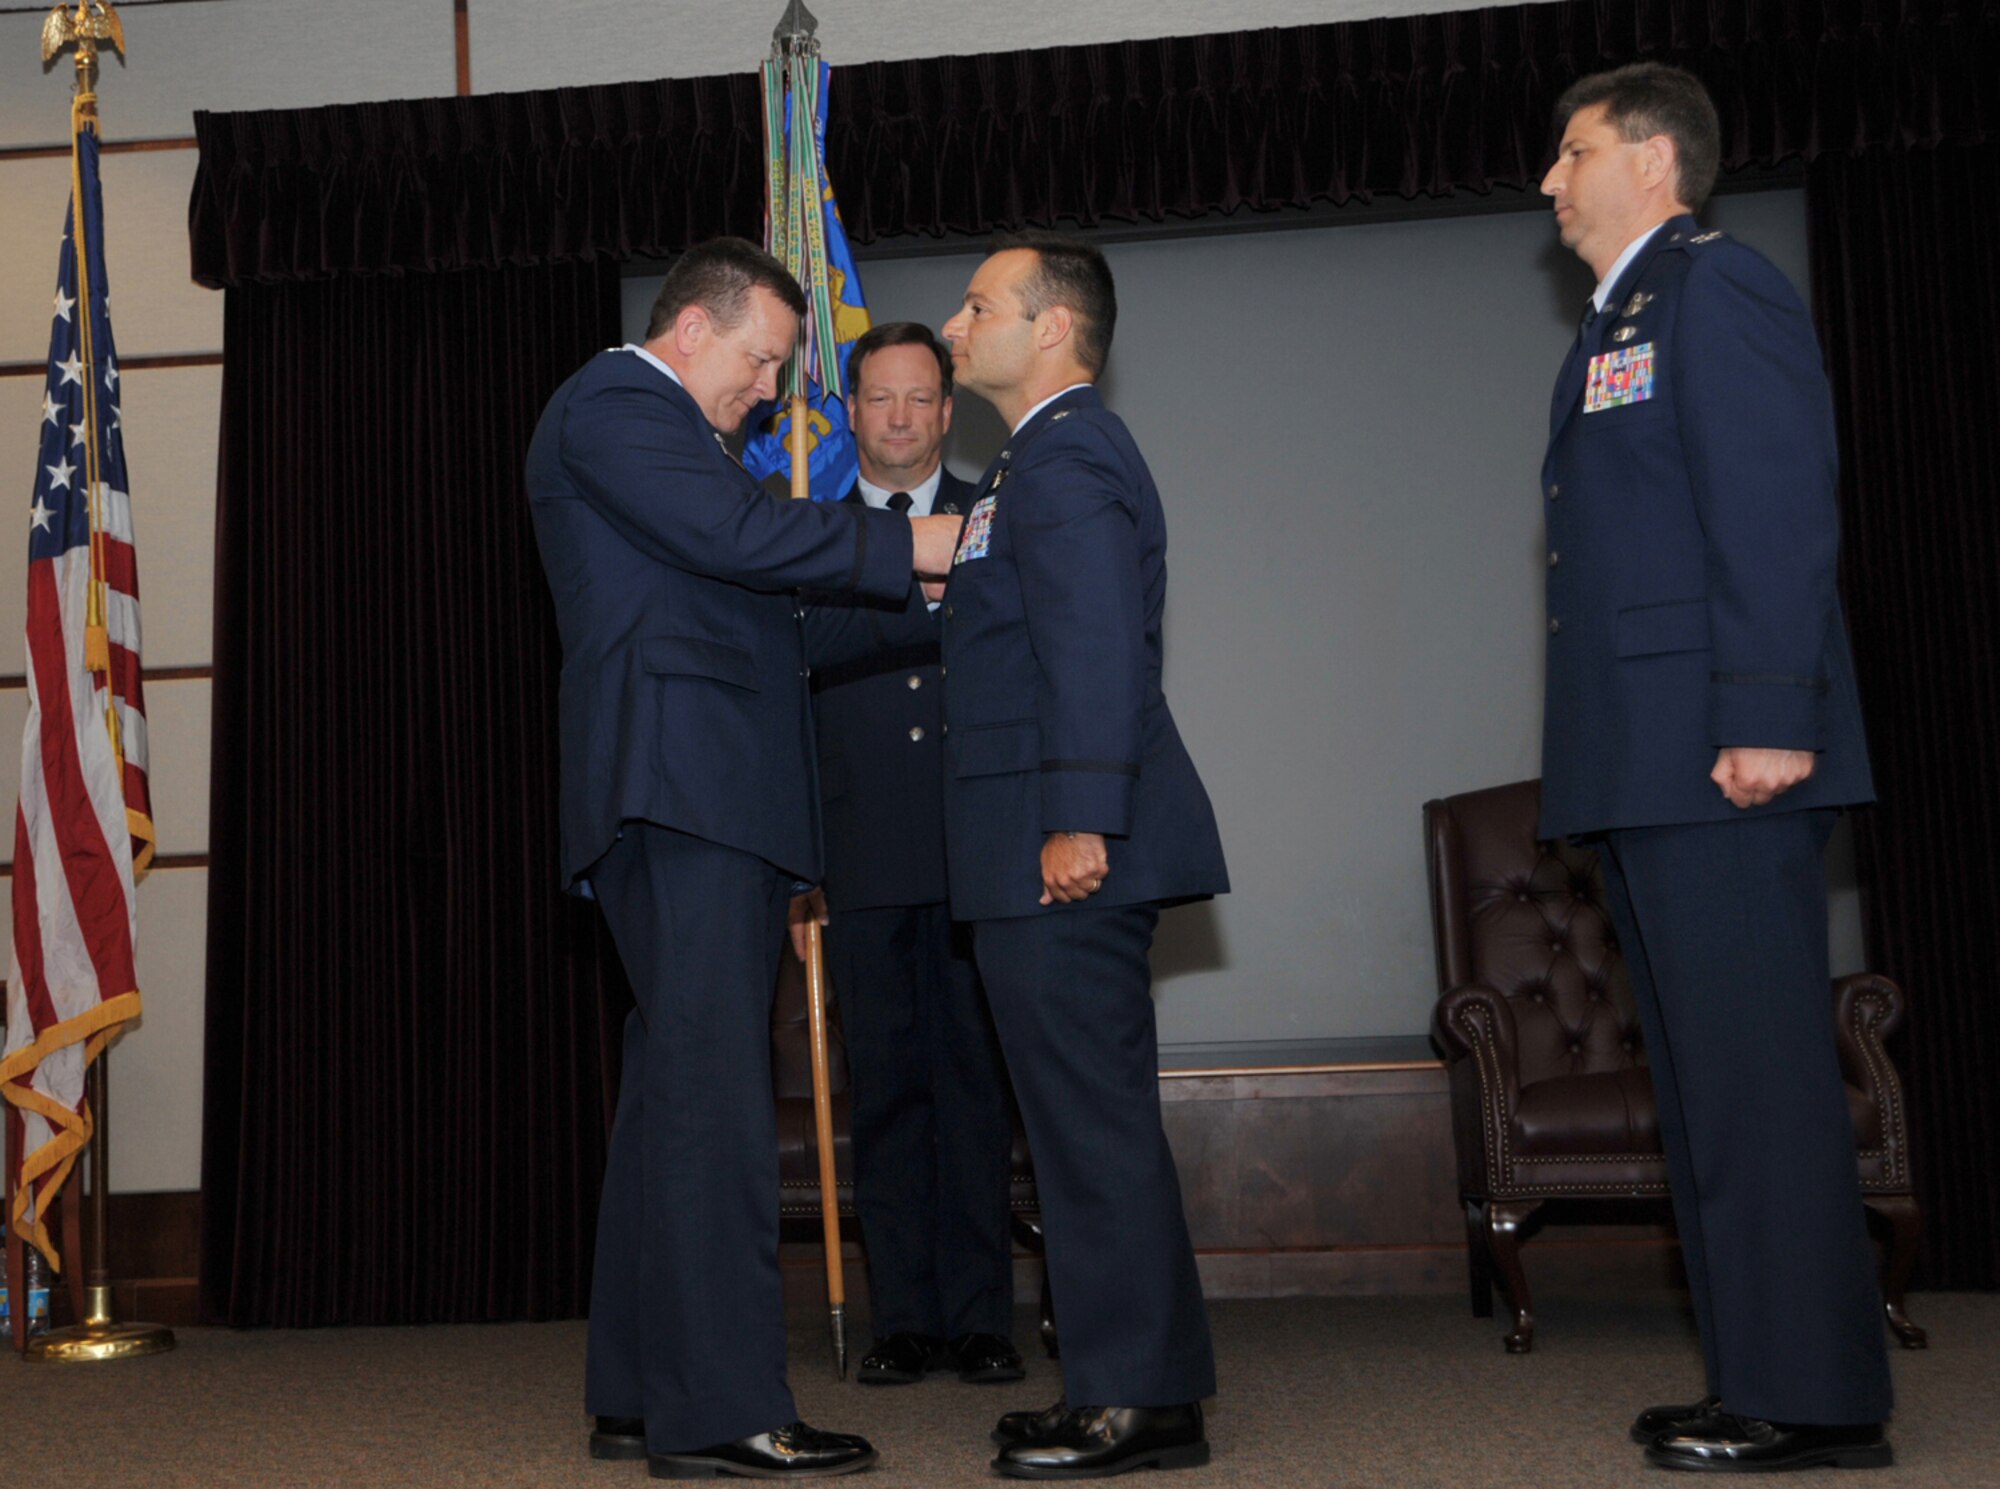 Col. Edsel A. "Archie" Frye Jr. clasps a commander's pin to Lt. Col. Tony Brusca's jacket during a 18th Air Refueling Squadron change of command ceremony on June 13. Colonel Brusca, a KC-135 Stratotanker pilot, took command of the 18th ARS after serving under every one of the squadron's previous commanders. The 18th ARS is the flying unit of the 931st Air Refueling Group, an Air Force Reserve unit at McConnell Air Force Base, Kan. Colonel Frye is the commander of the 931st ARG. (U.S. Air Force photo/Tech. Sgt. Jason Schaap) 